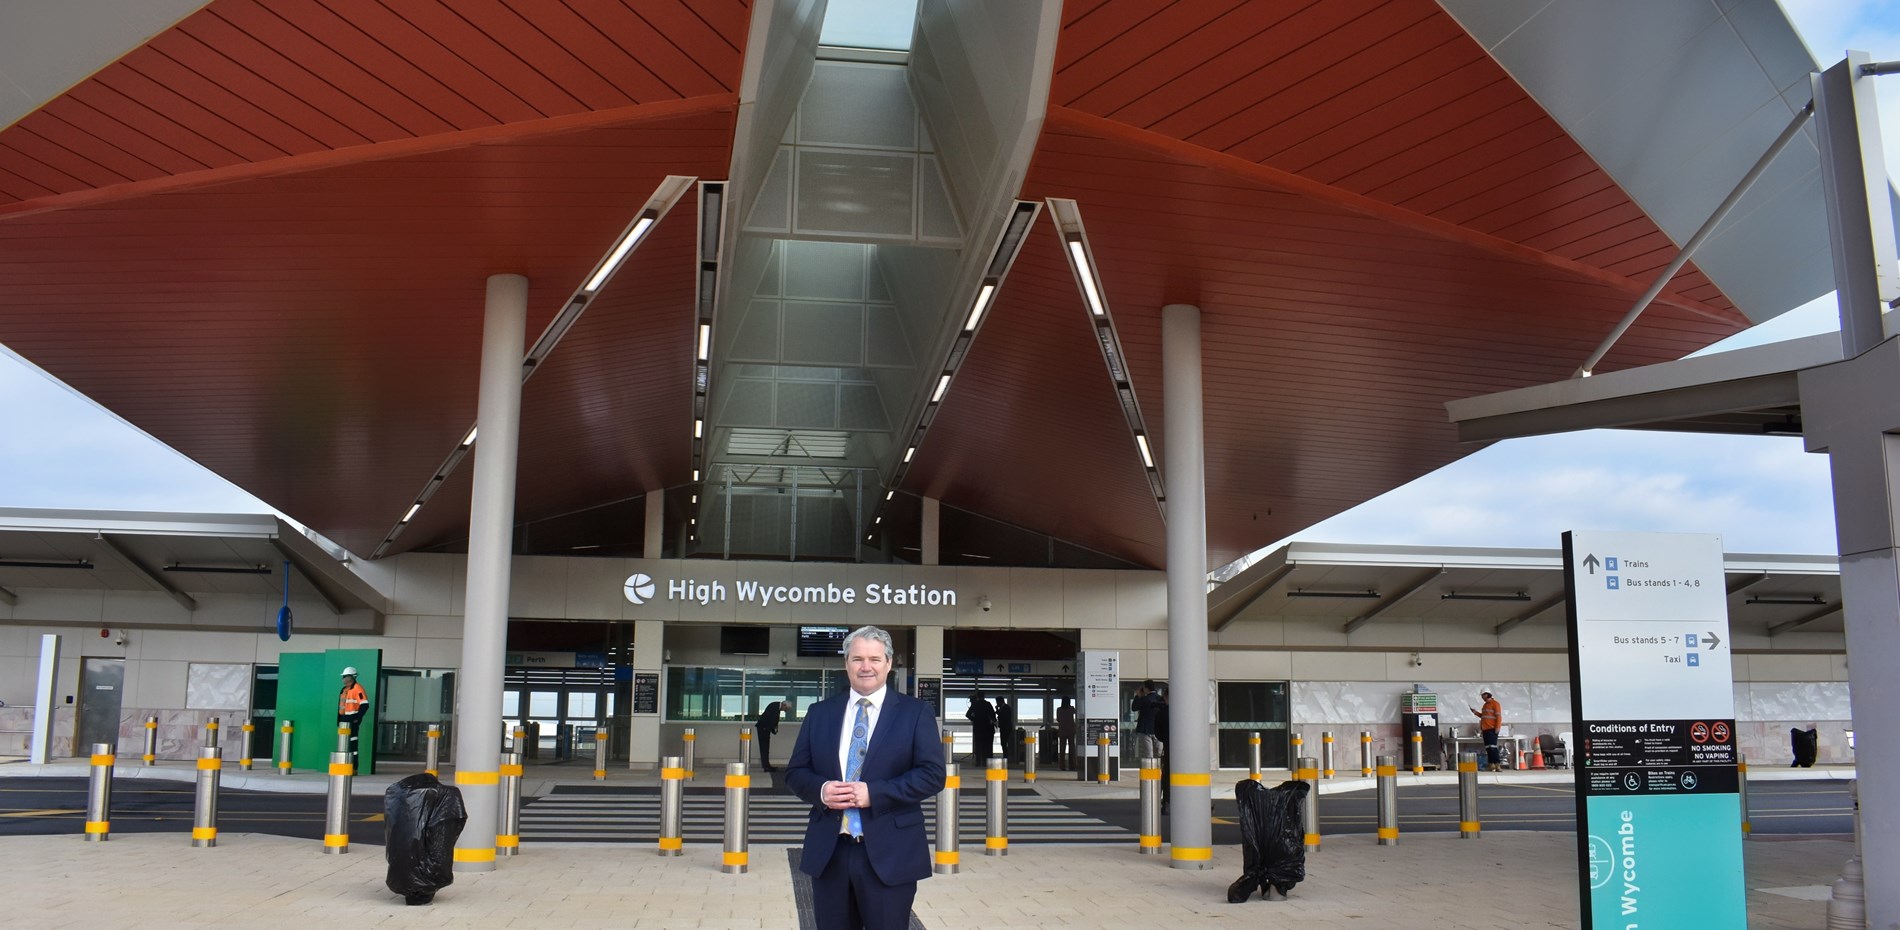 High Wycombe Train Station - Airport Link Opening Main Image